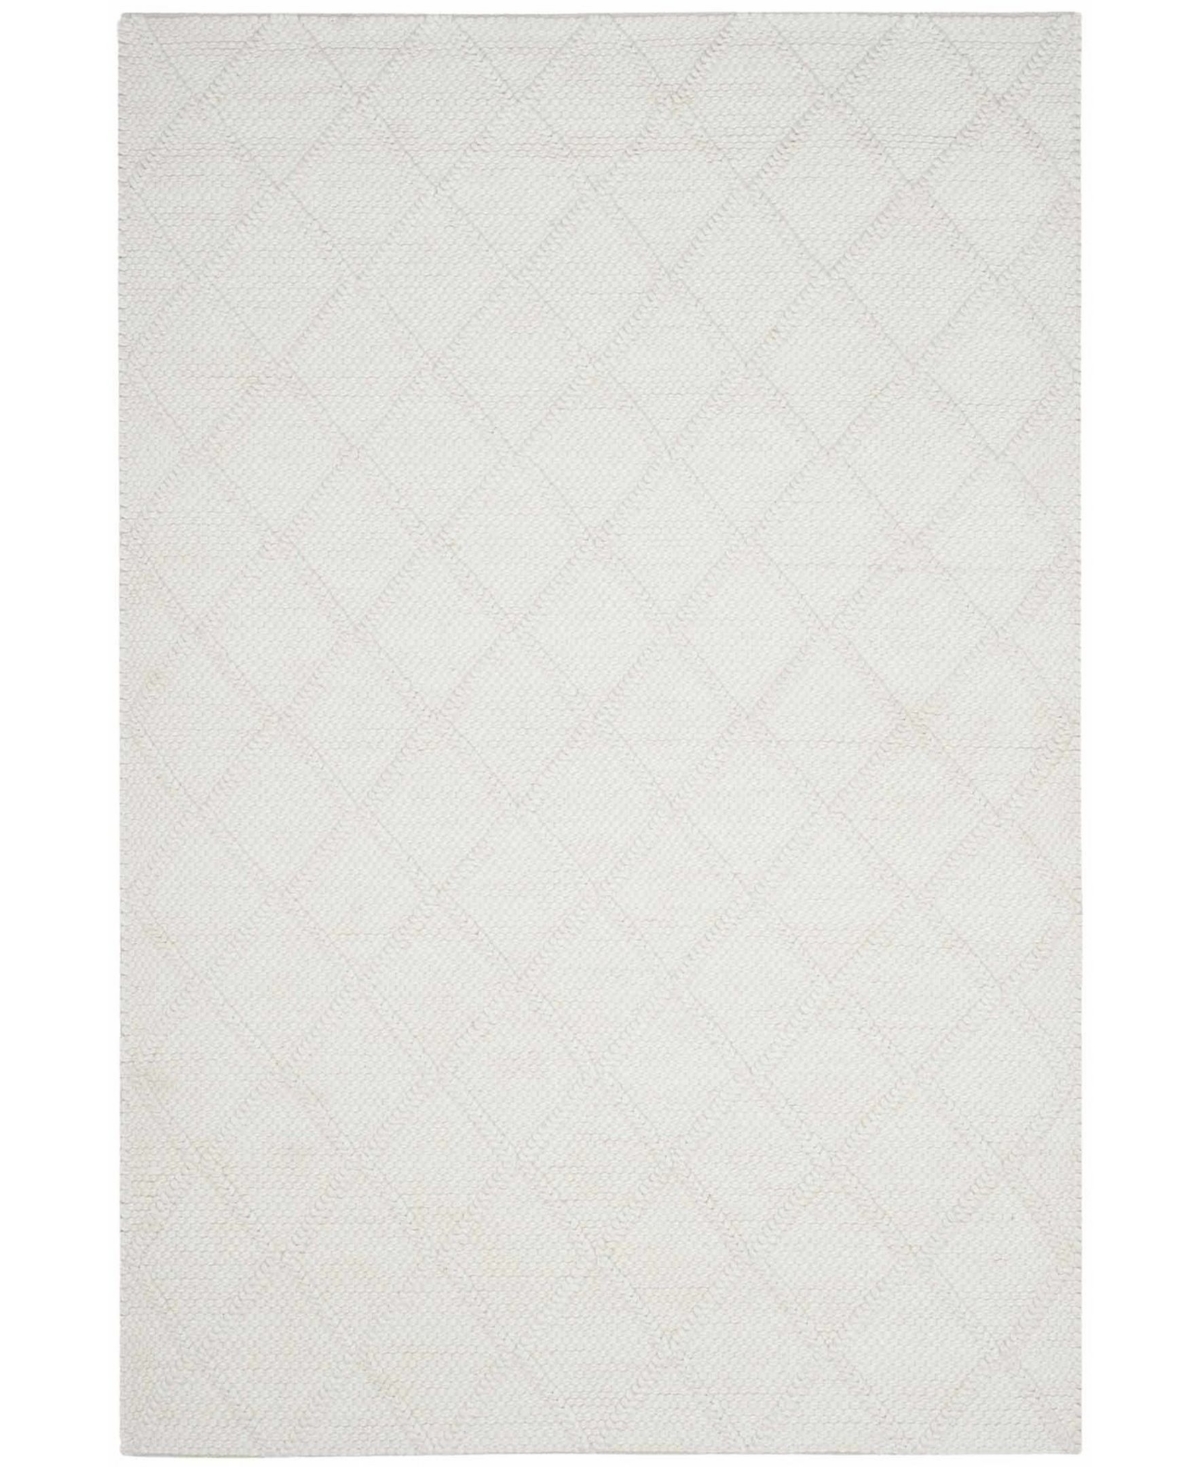 Lauren Ralph Lauren Millie LRL6310A Ivory and Ivory 4' X 6' Area Rug - Ivory